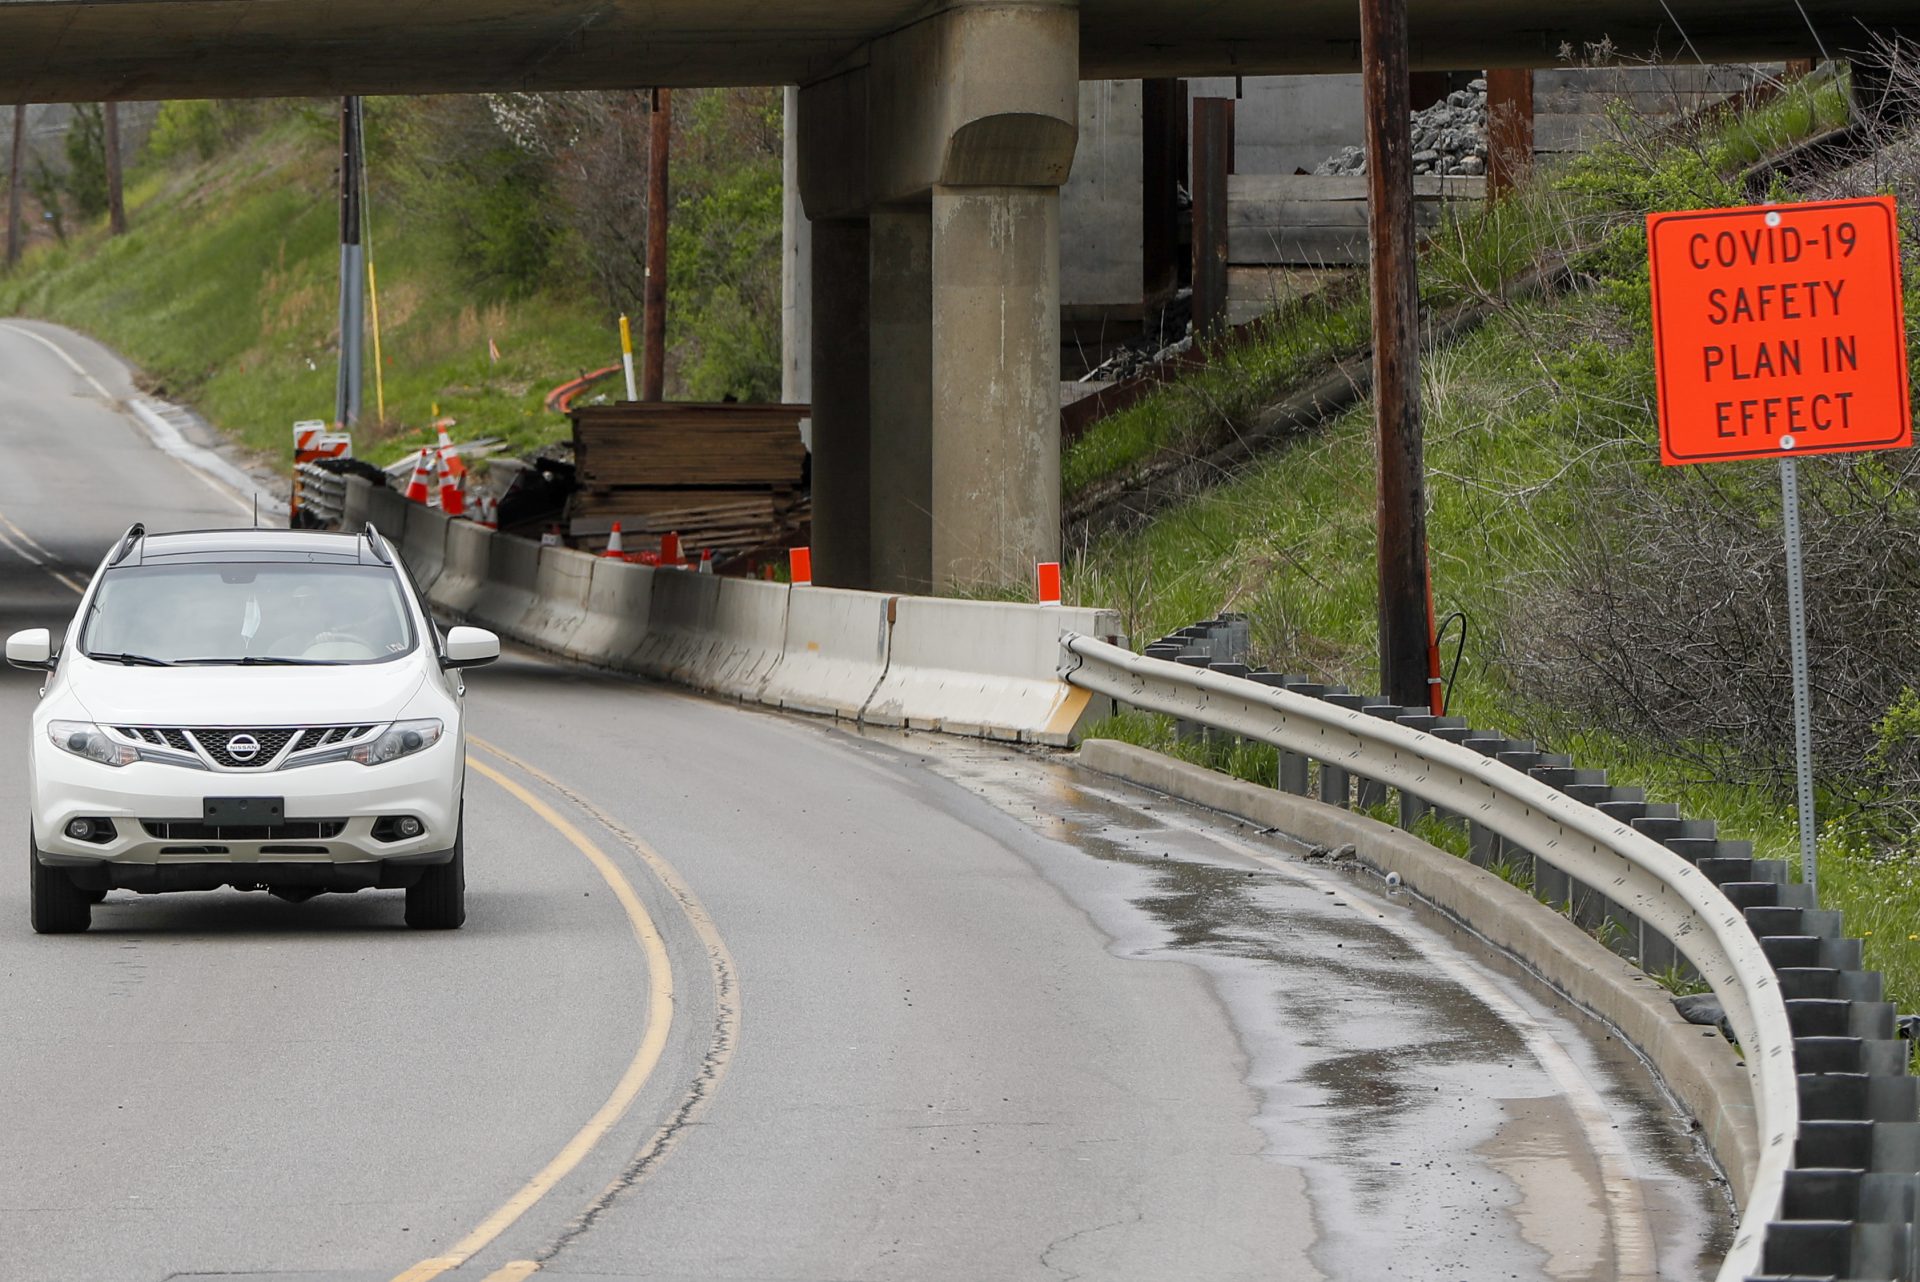 As sign stating "COVID-19 Safety Plan in Effect" marks the approach to the construction zone under an overpass for Interstate 79 as traffic moves through it, in Cranberry Township, Pa., Tuesday, April 28, 2020.